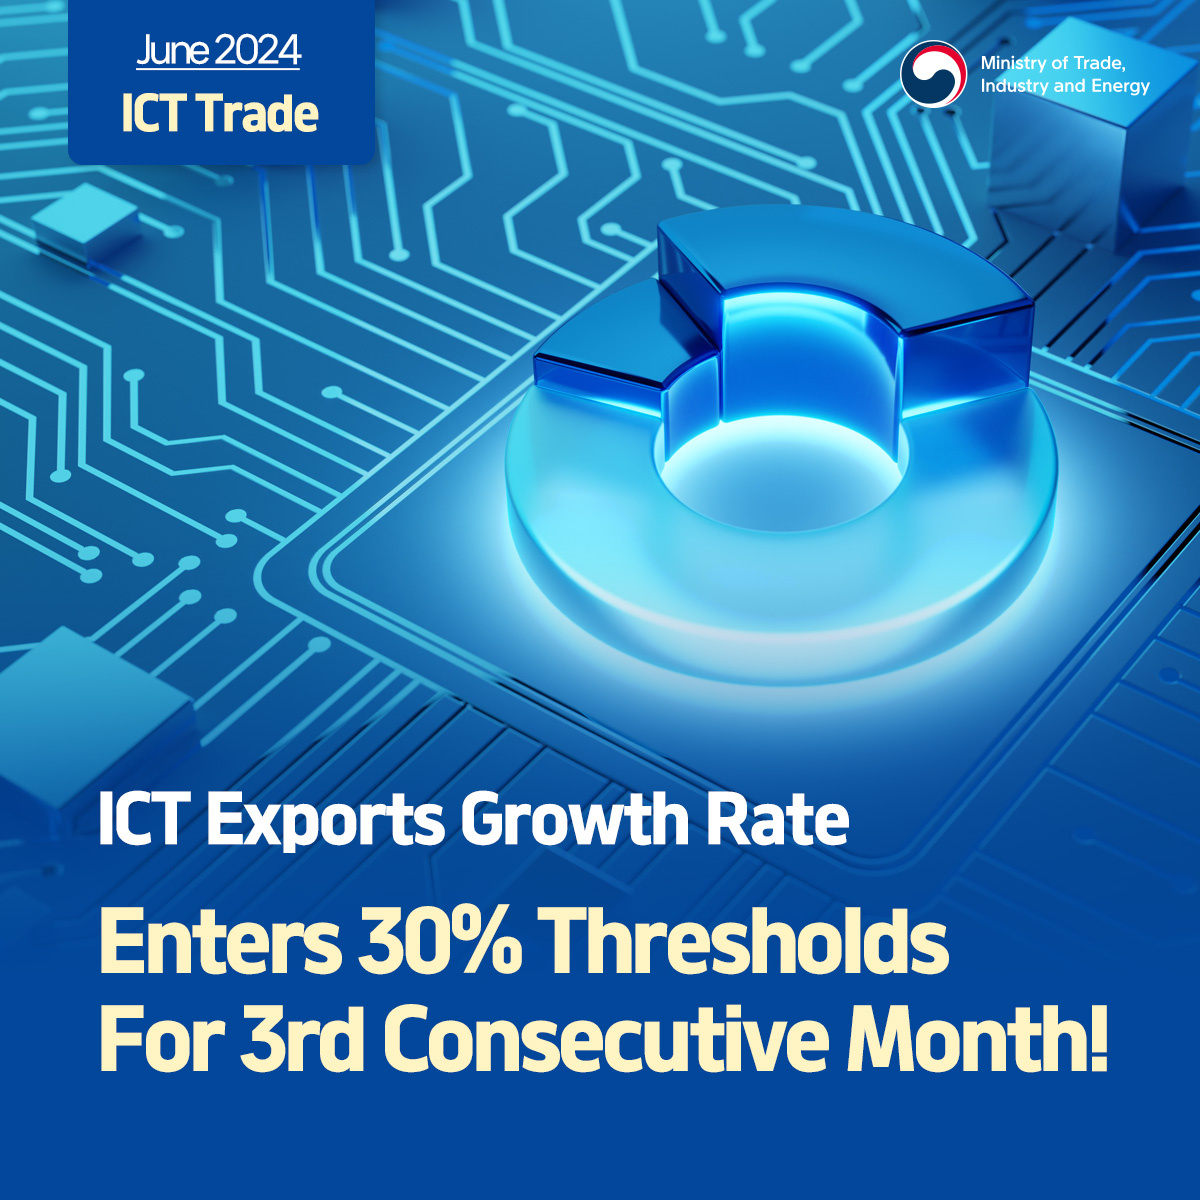 Korea's ICT exports enter 30% growth rate thresholds for 3rd consecutive month!